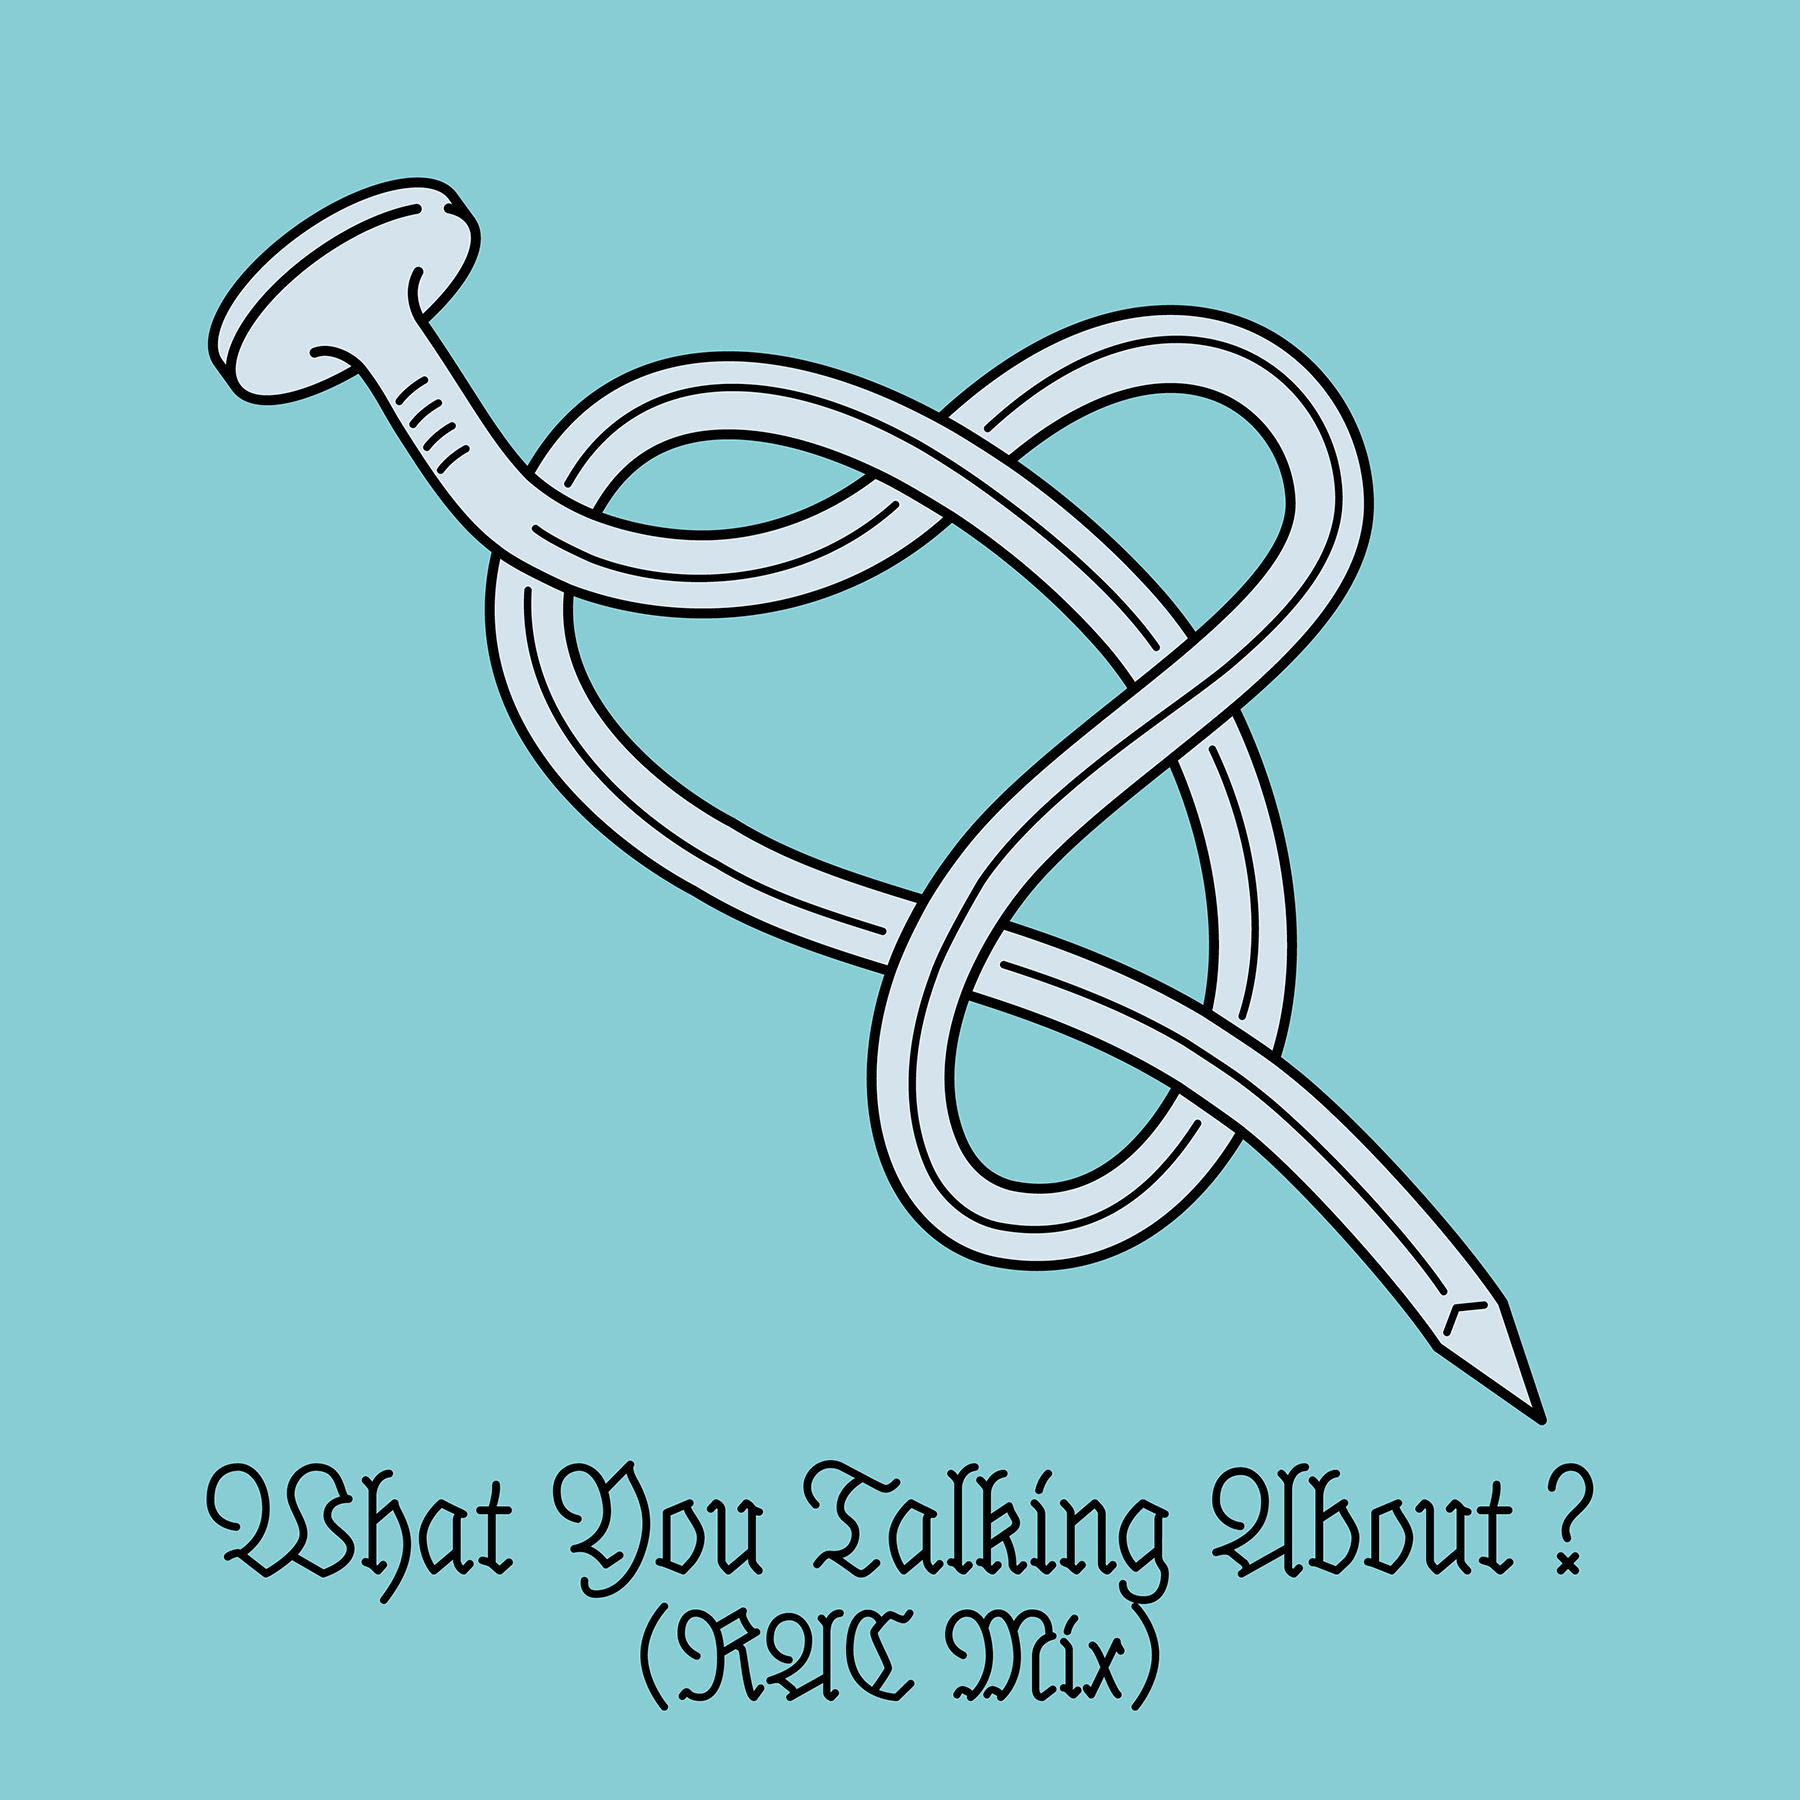 Peter Bjorn and John Release RAC Remix of "What You Talking About?" Now out on Kobalt Music/ Ingrid Records.